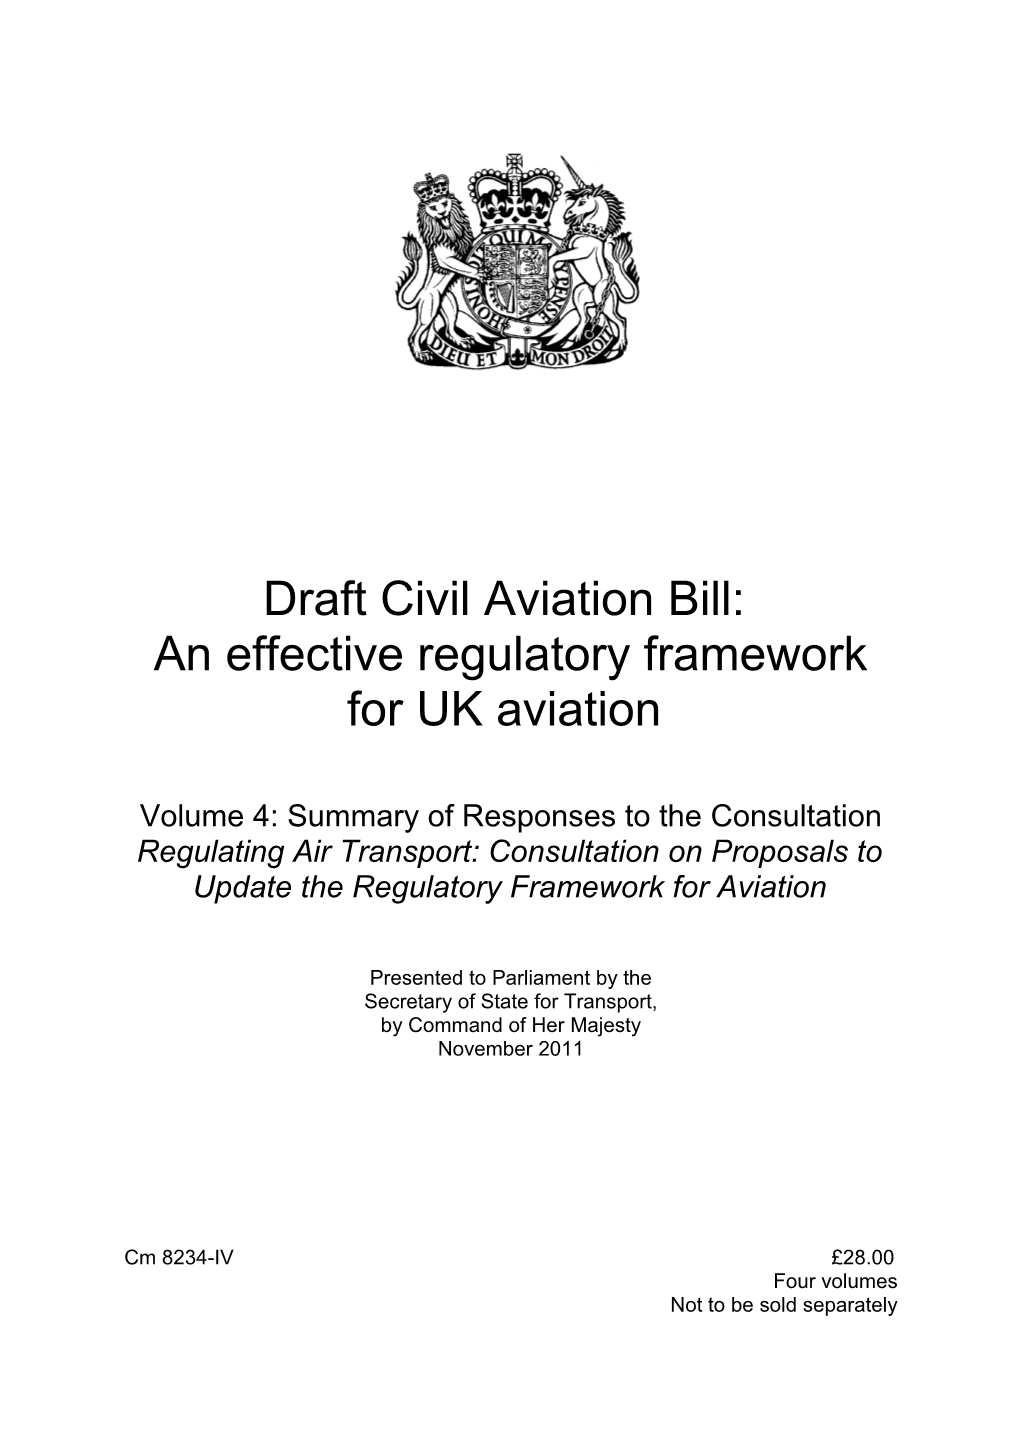 Summary of Responses to the Consultation Regulating Air Transport: Consultation on Proposal